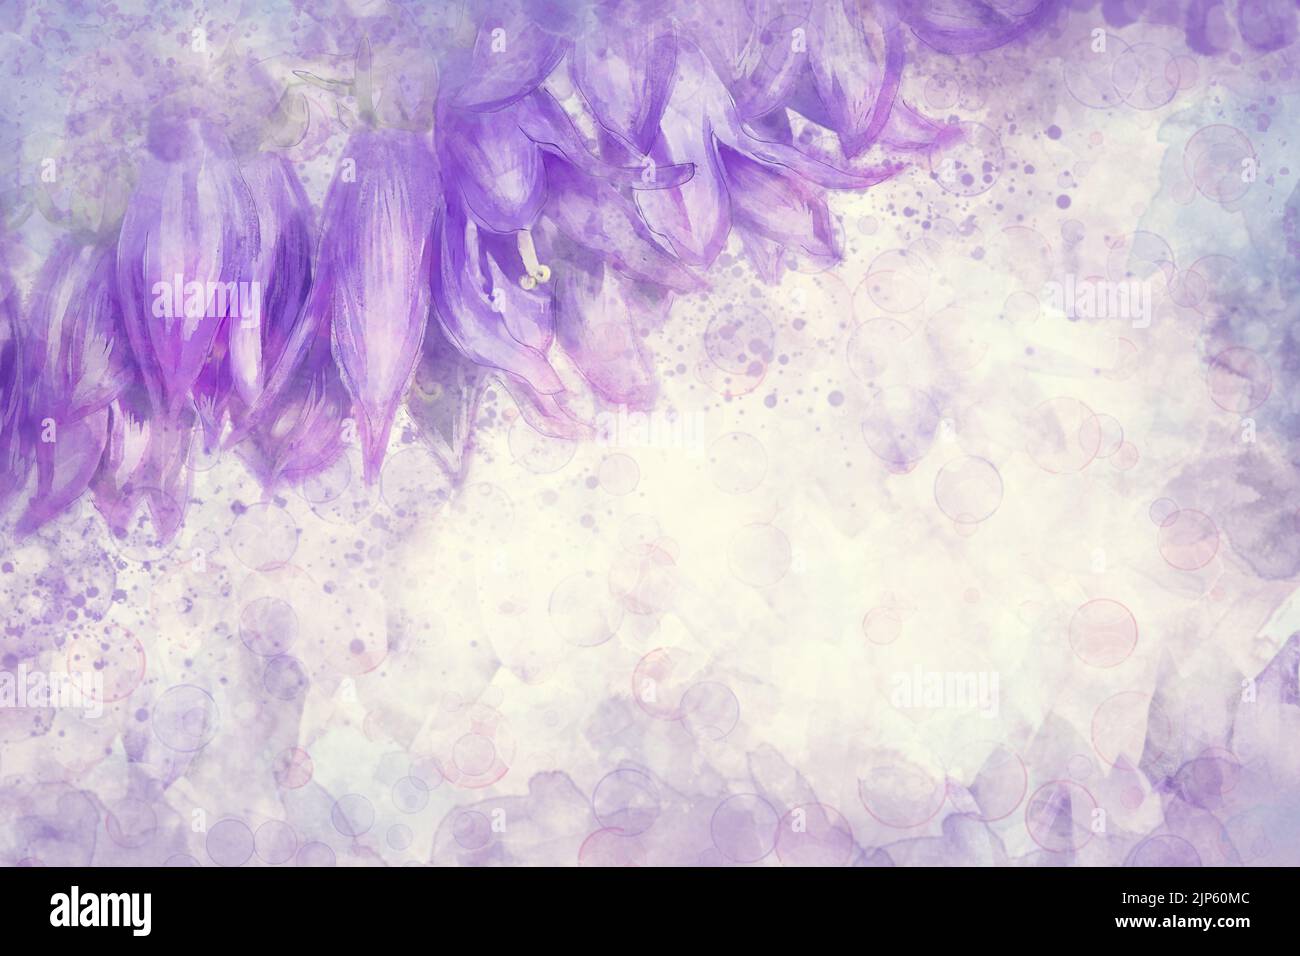 Abstract Purple Flower Background Watercolor.Digital Illustration. Stock Photo